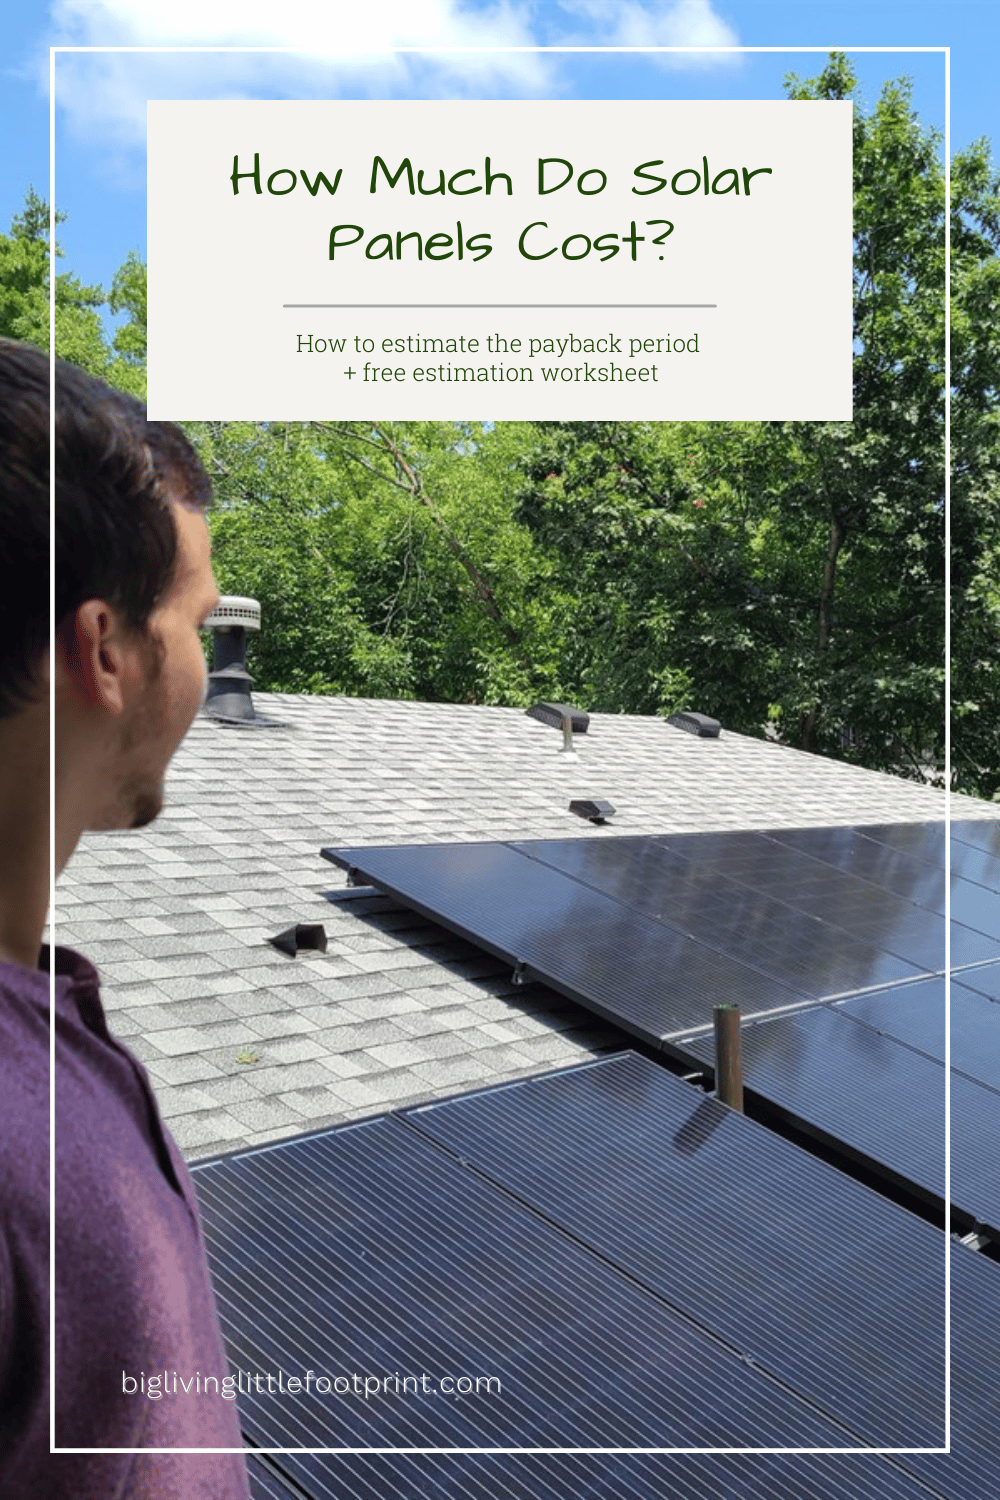 How much do Solar Panels Cost? What is their Payback Period?